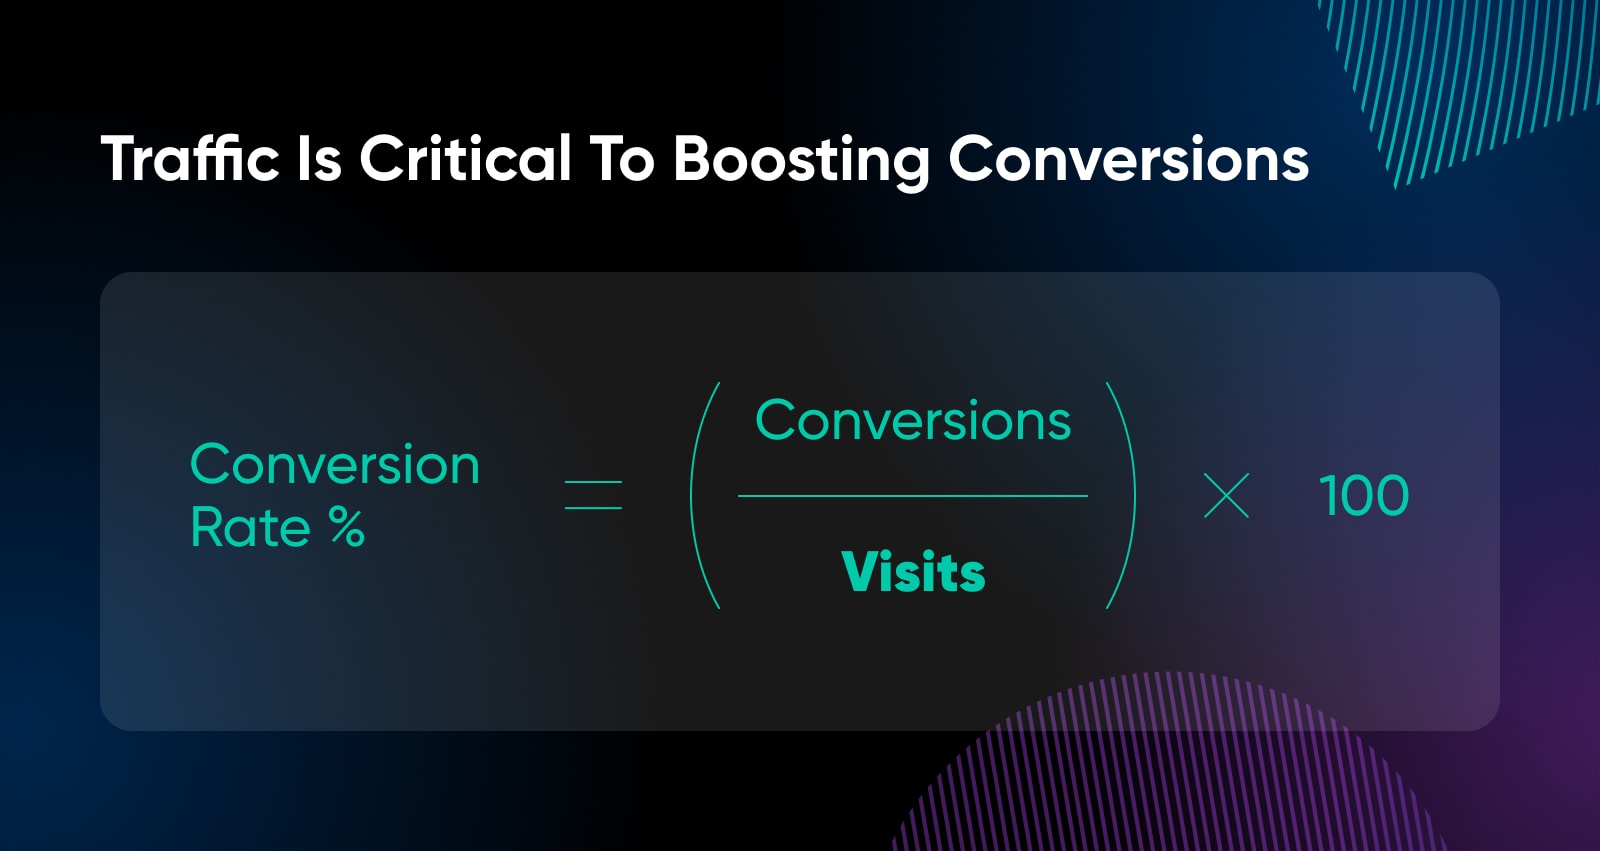 conversion rate % equals conversions over visits times 100 